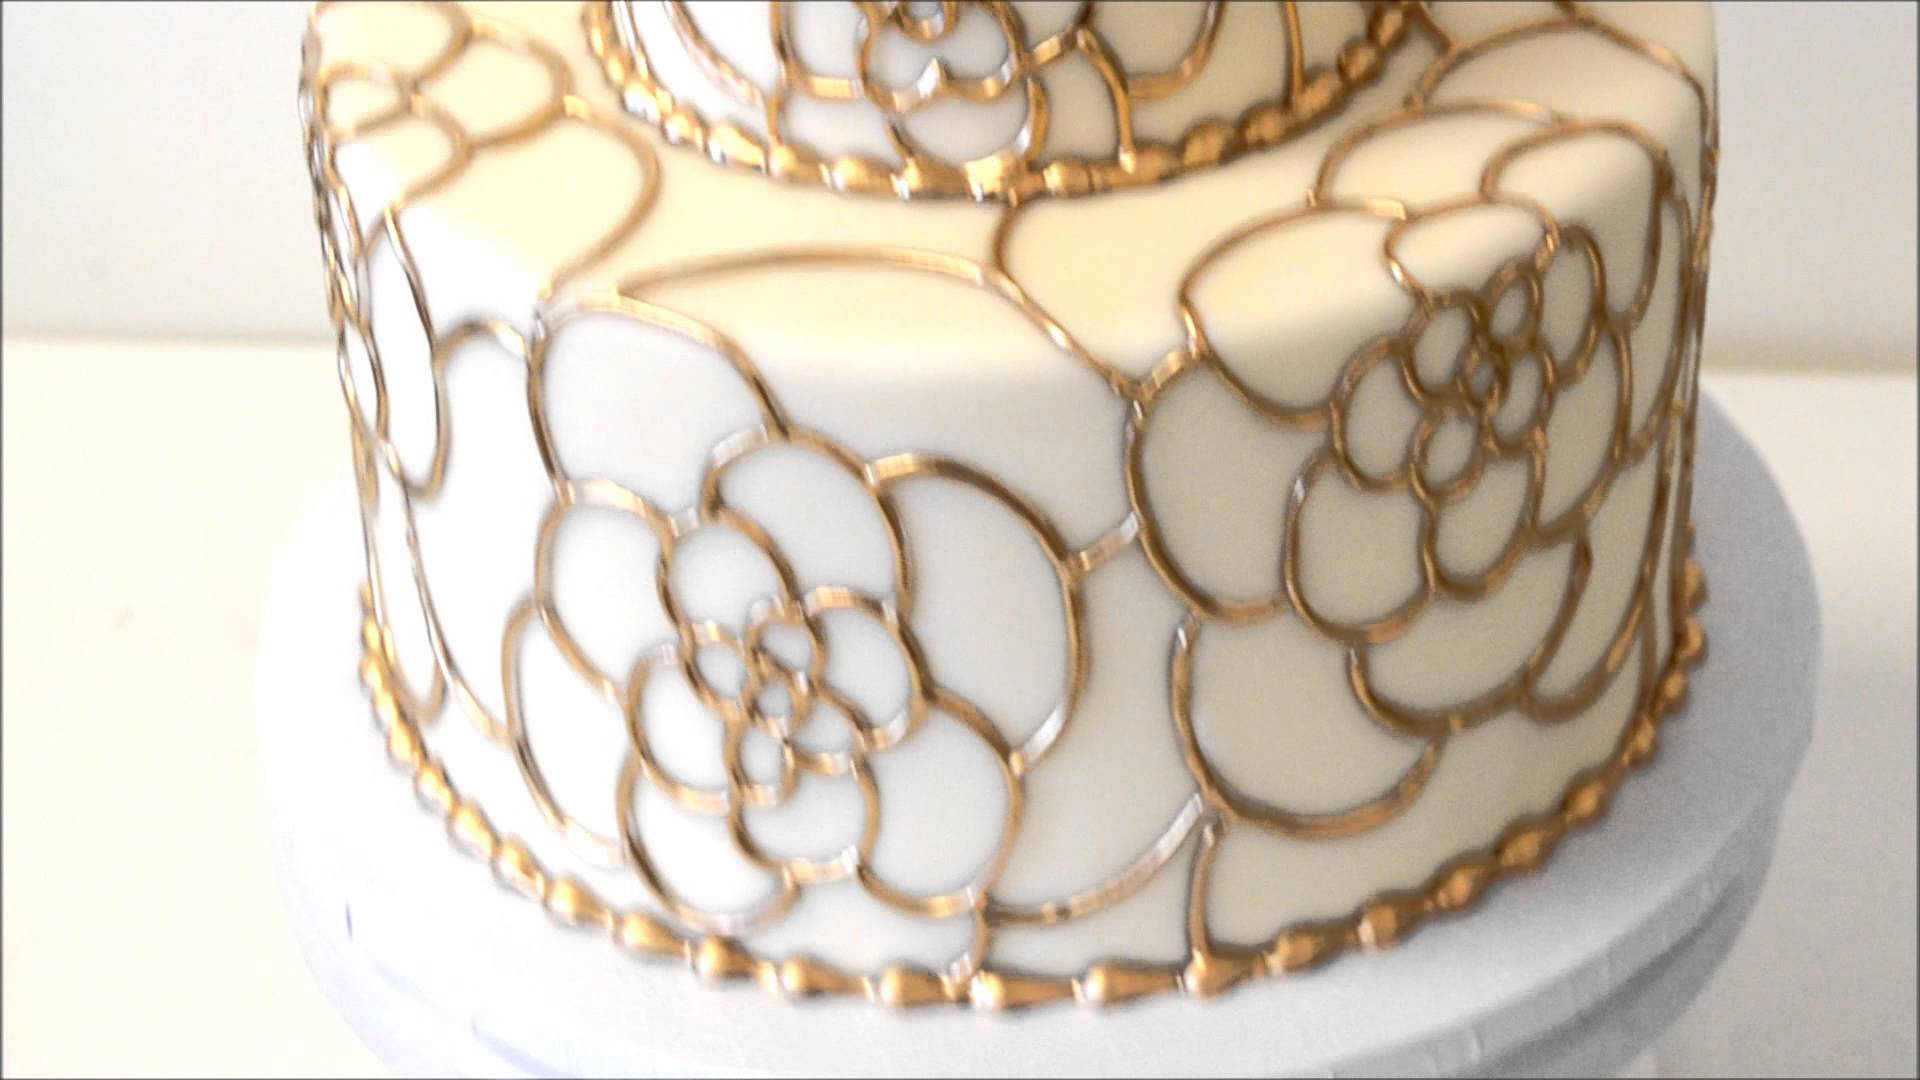 Gold Wedding Cake with Icing